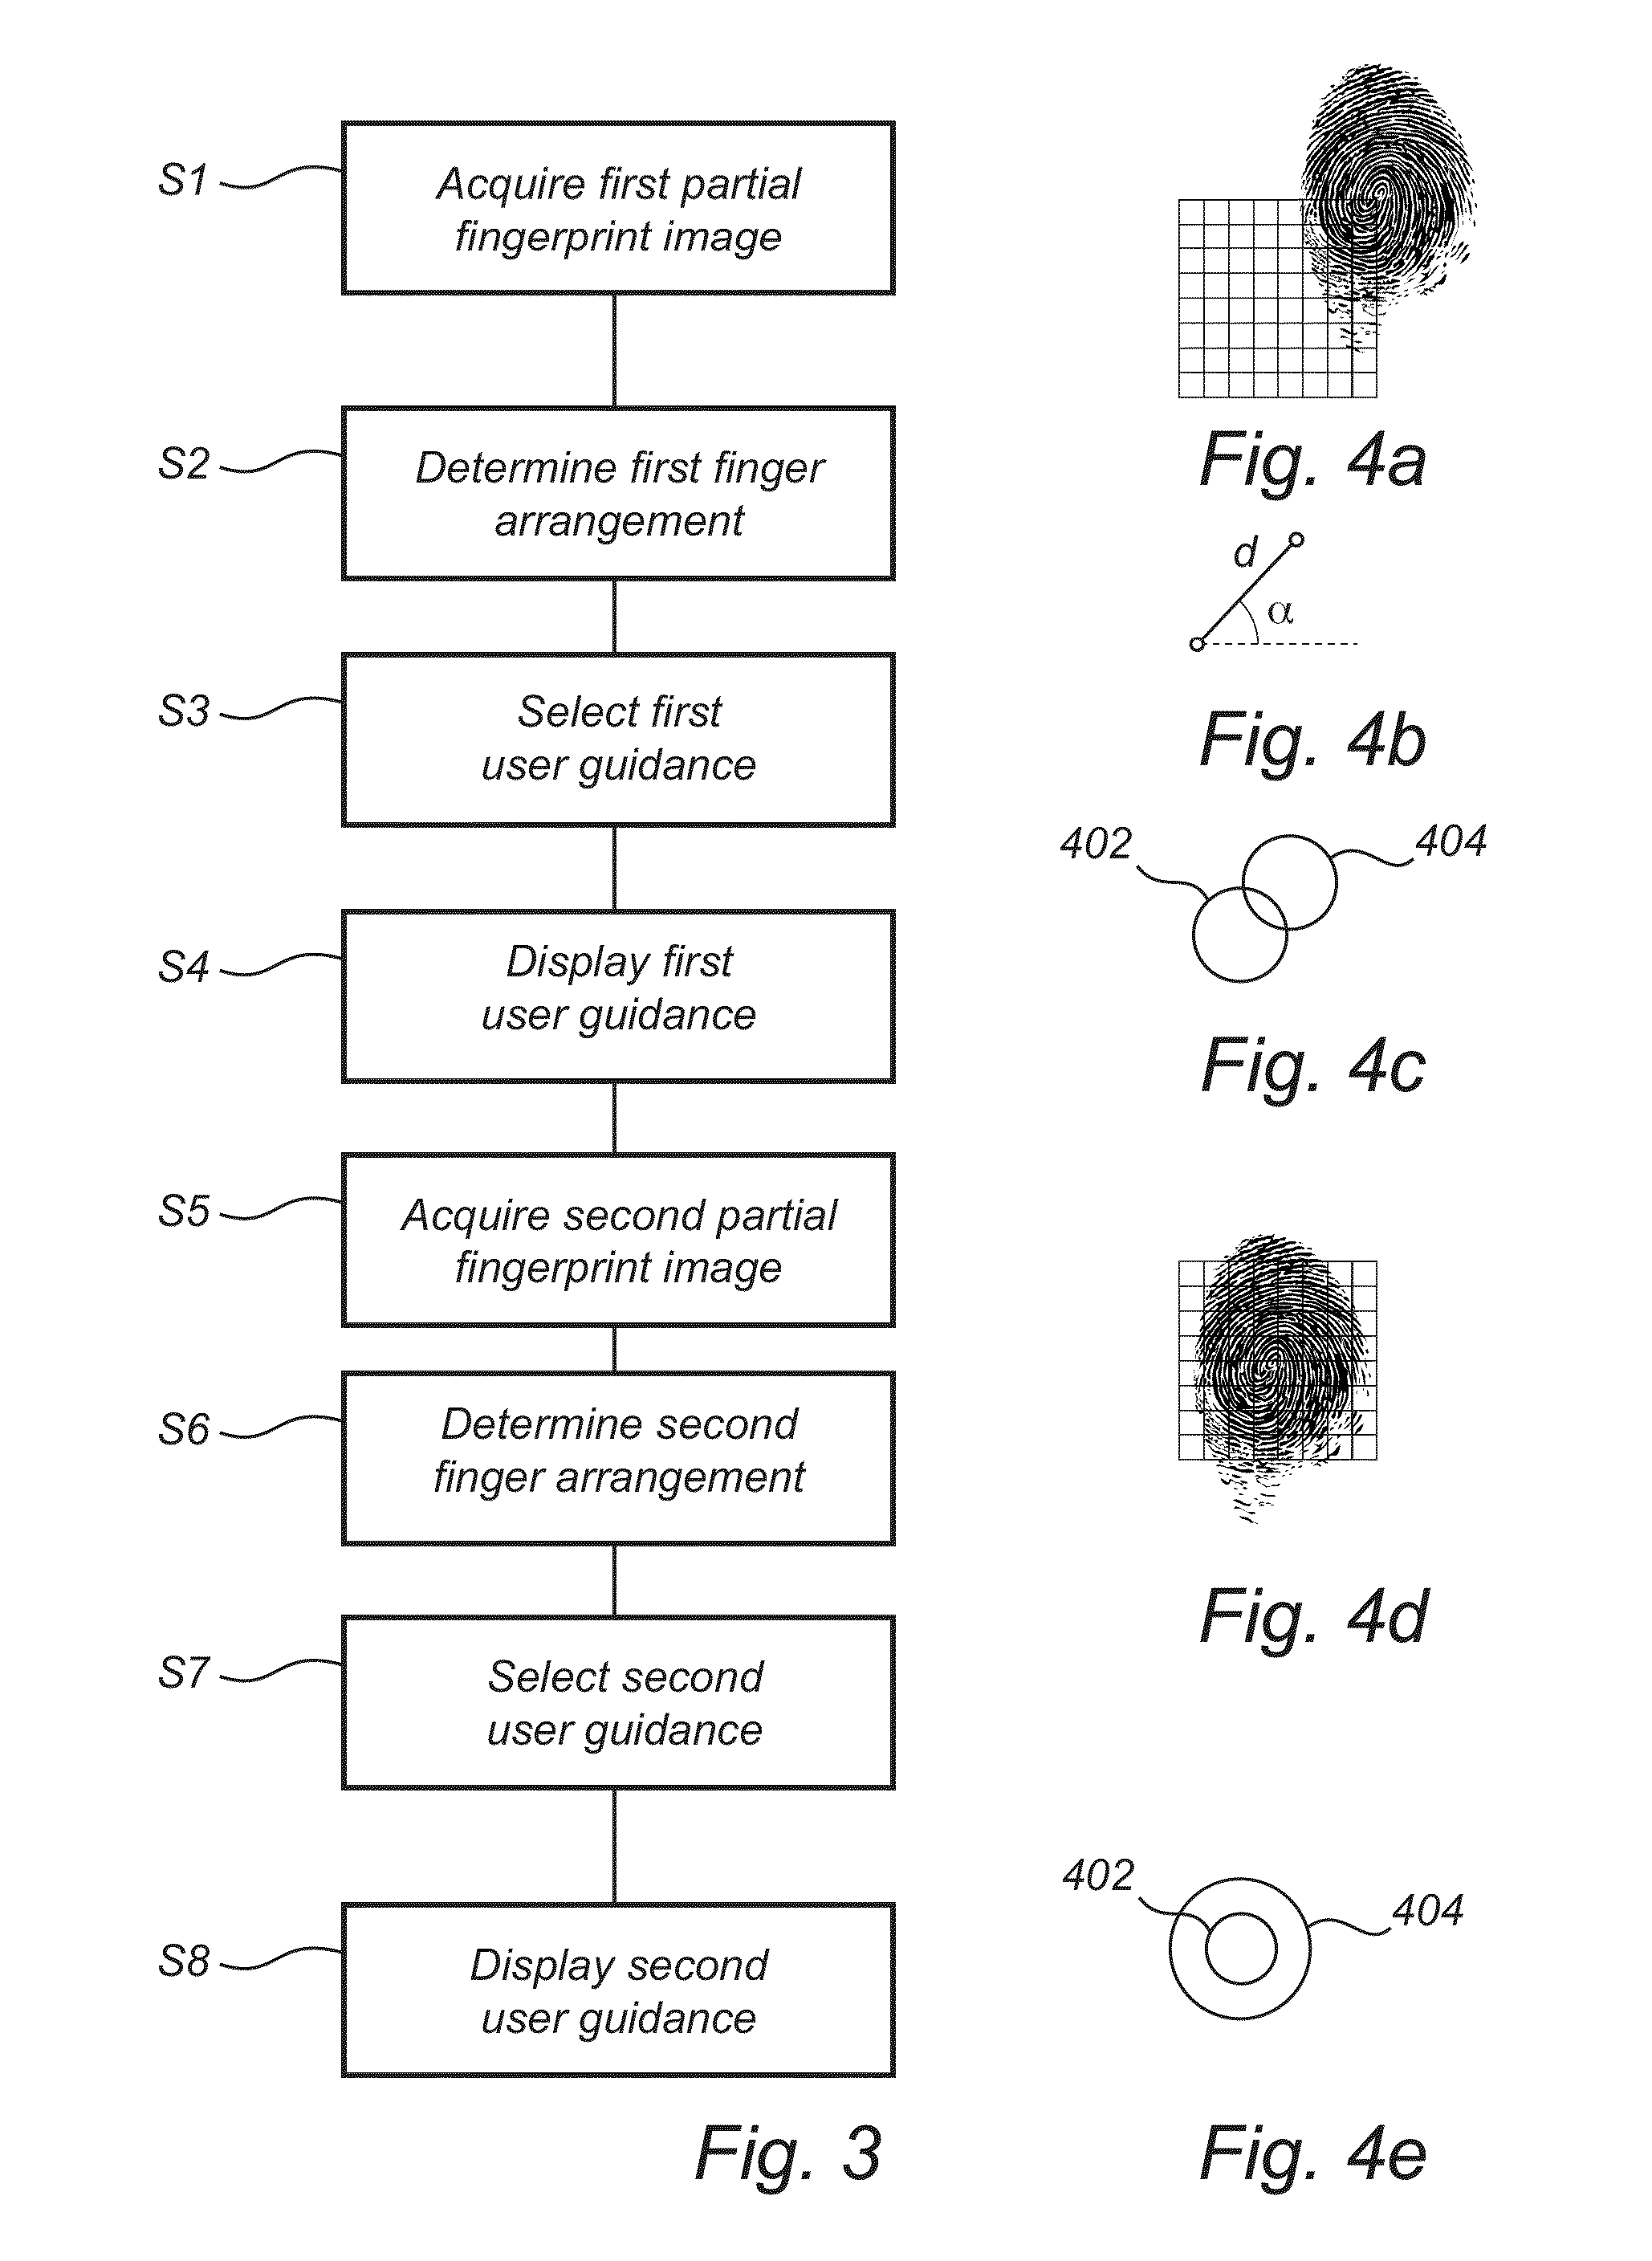 Method of guiding a user of a portable electronic device